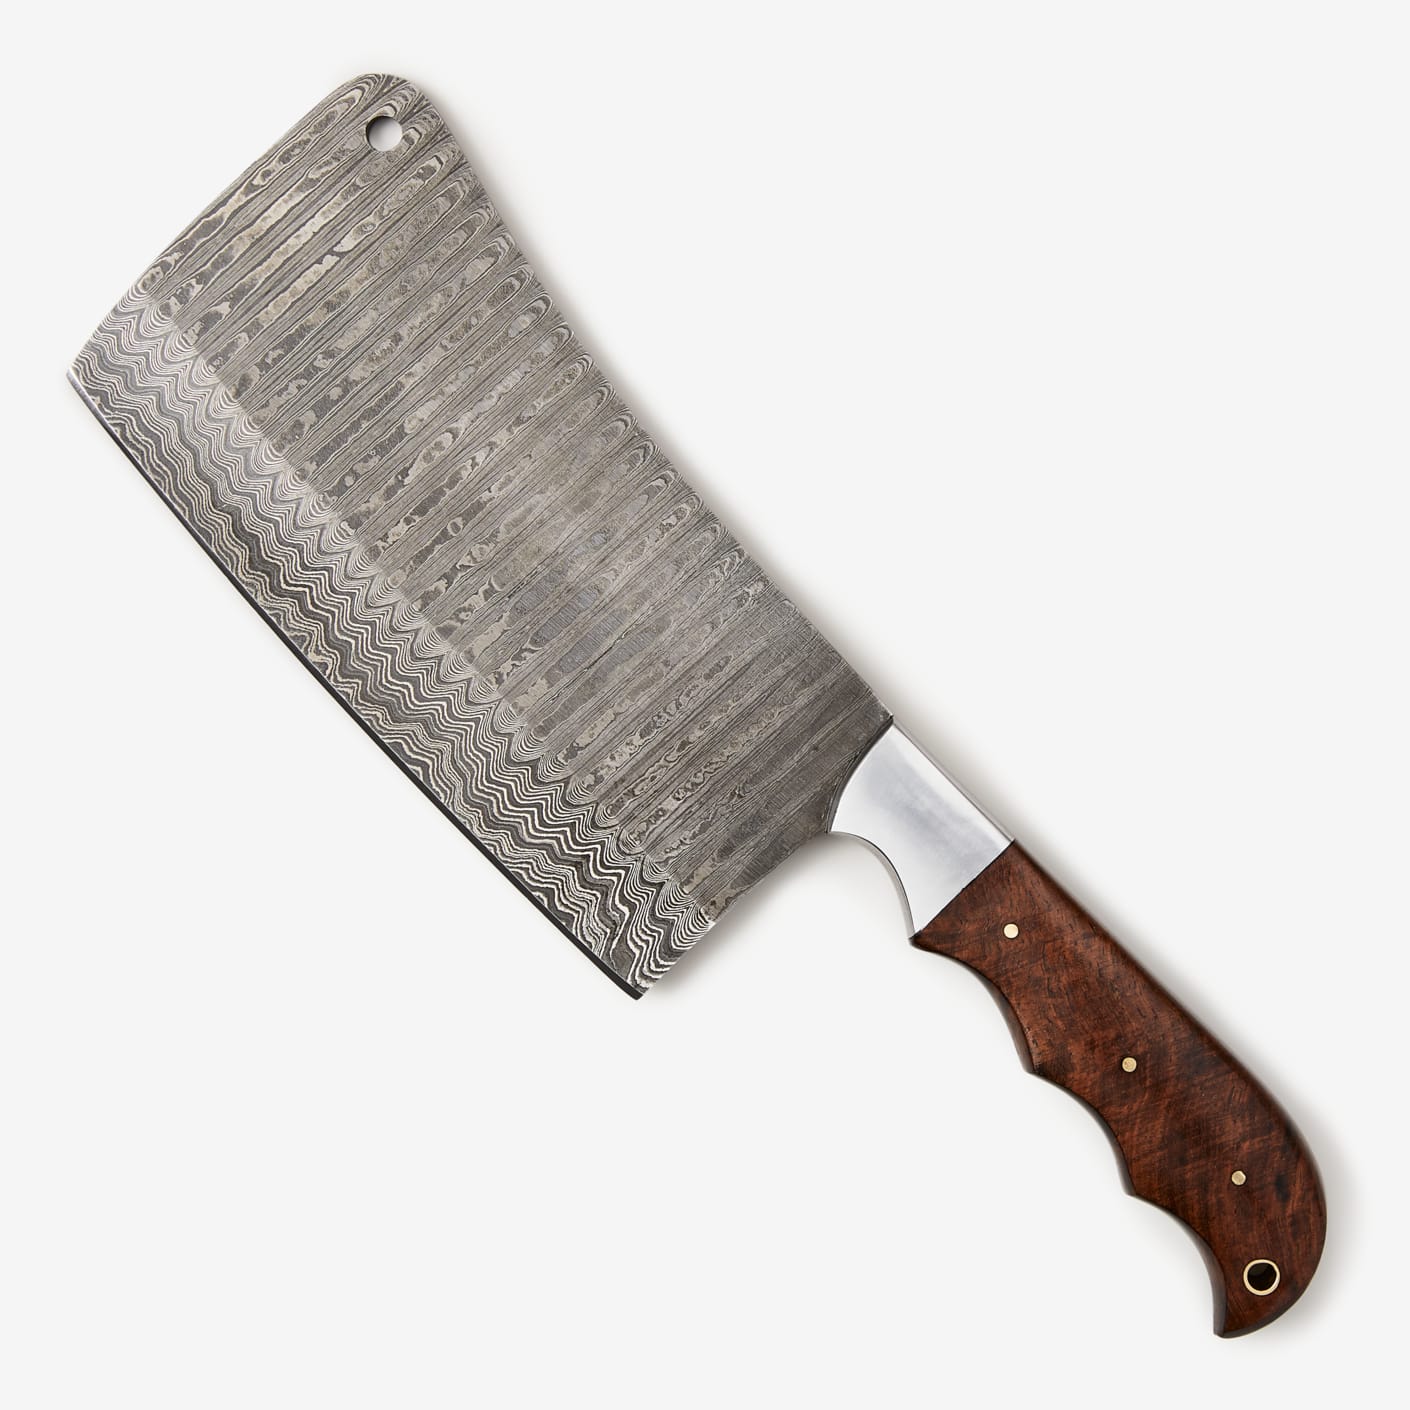 https://dam.bespokepost.com/image/upload/c_limit,dpr_auto,f_auto,q_auto,w_1410/v1/Storefront/2022%20/07-July/in-house/black-forge-knives-damascus-cleaver-w-pakkawood-handle_2